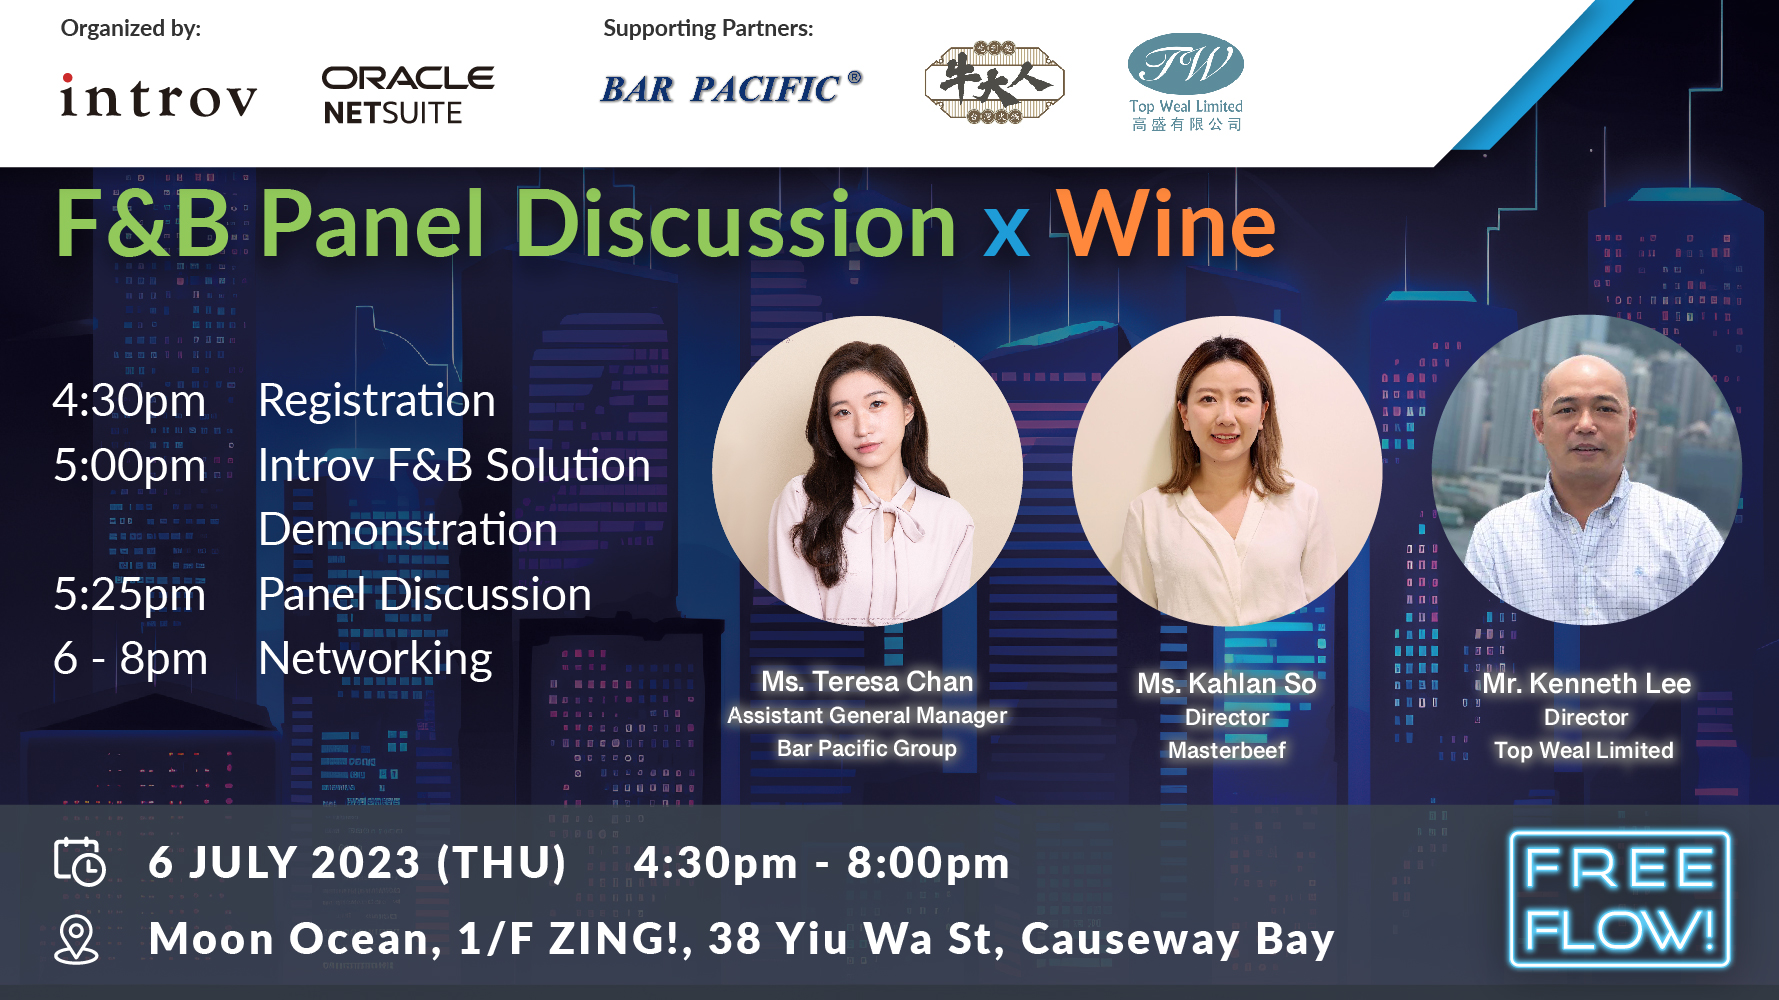 F&B Panel Discussion X Wine Event  (6 July 2023)